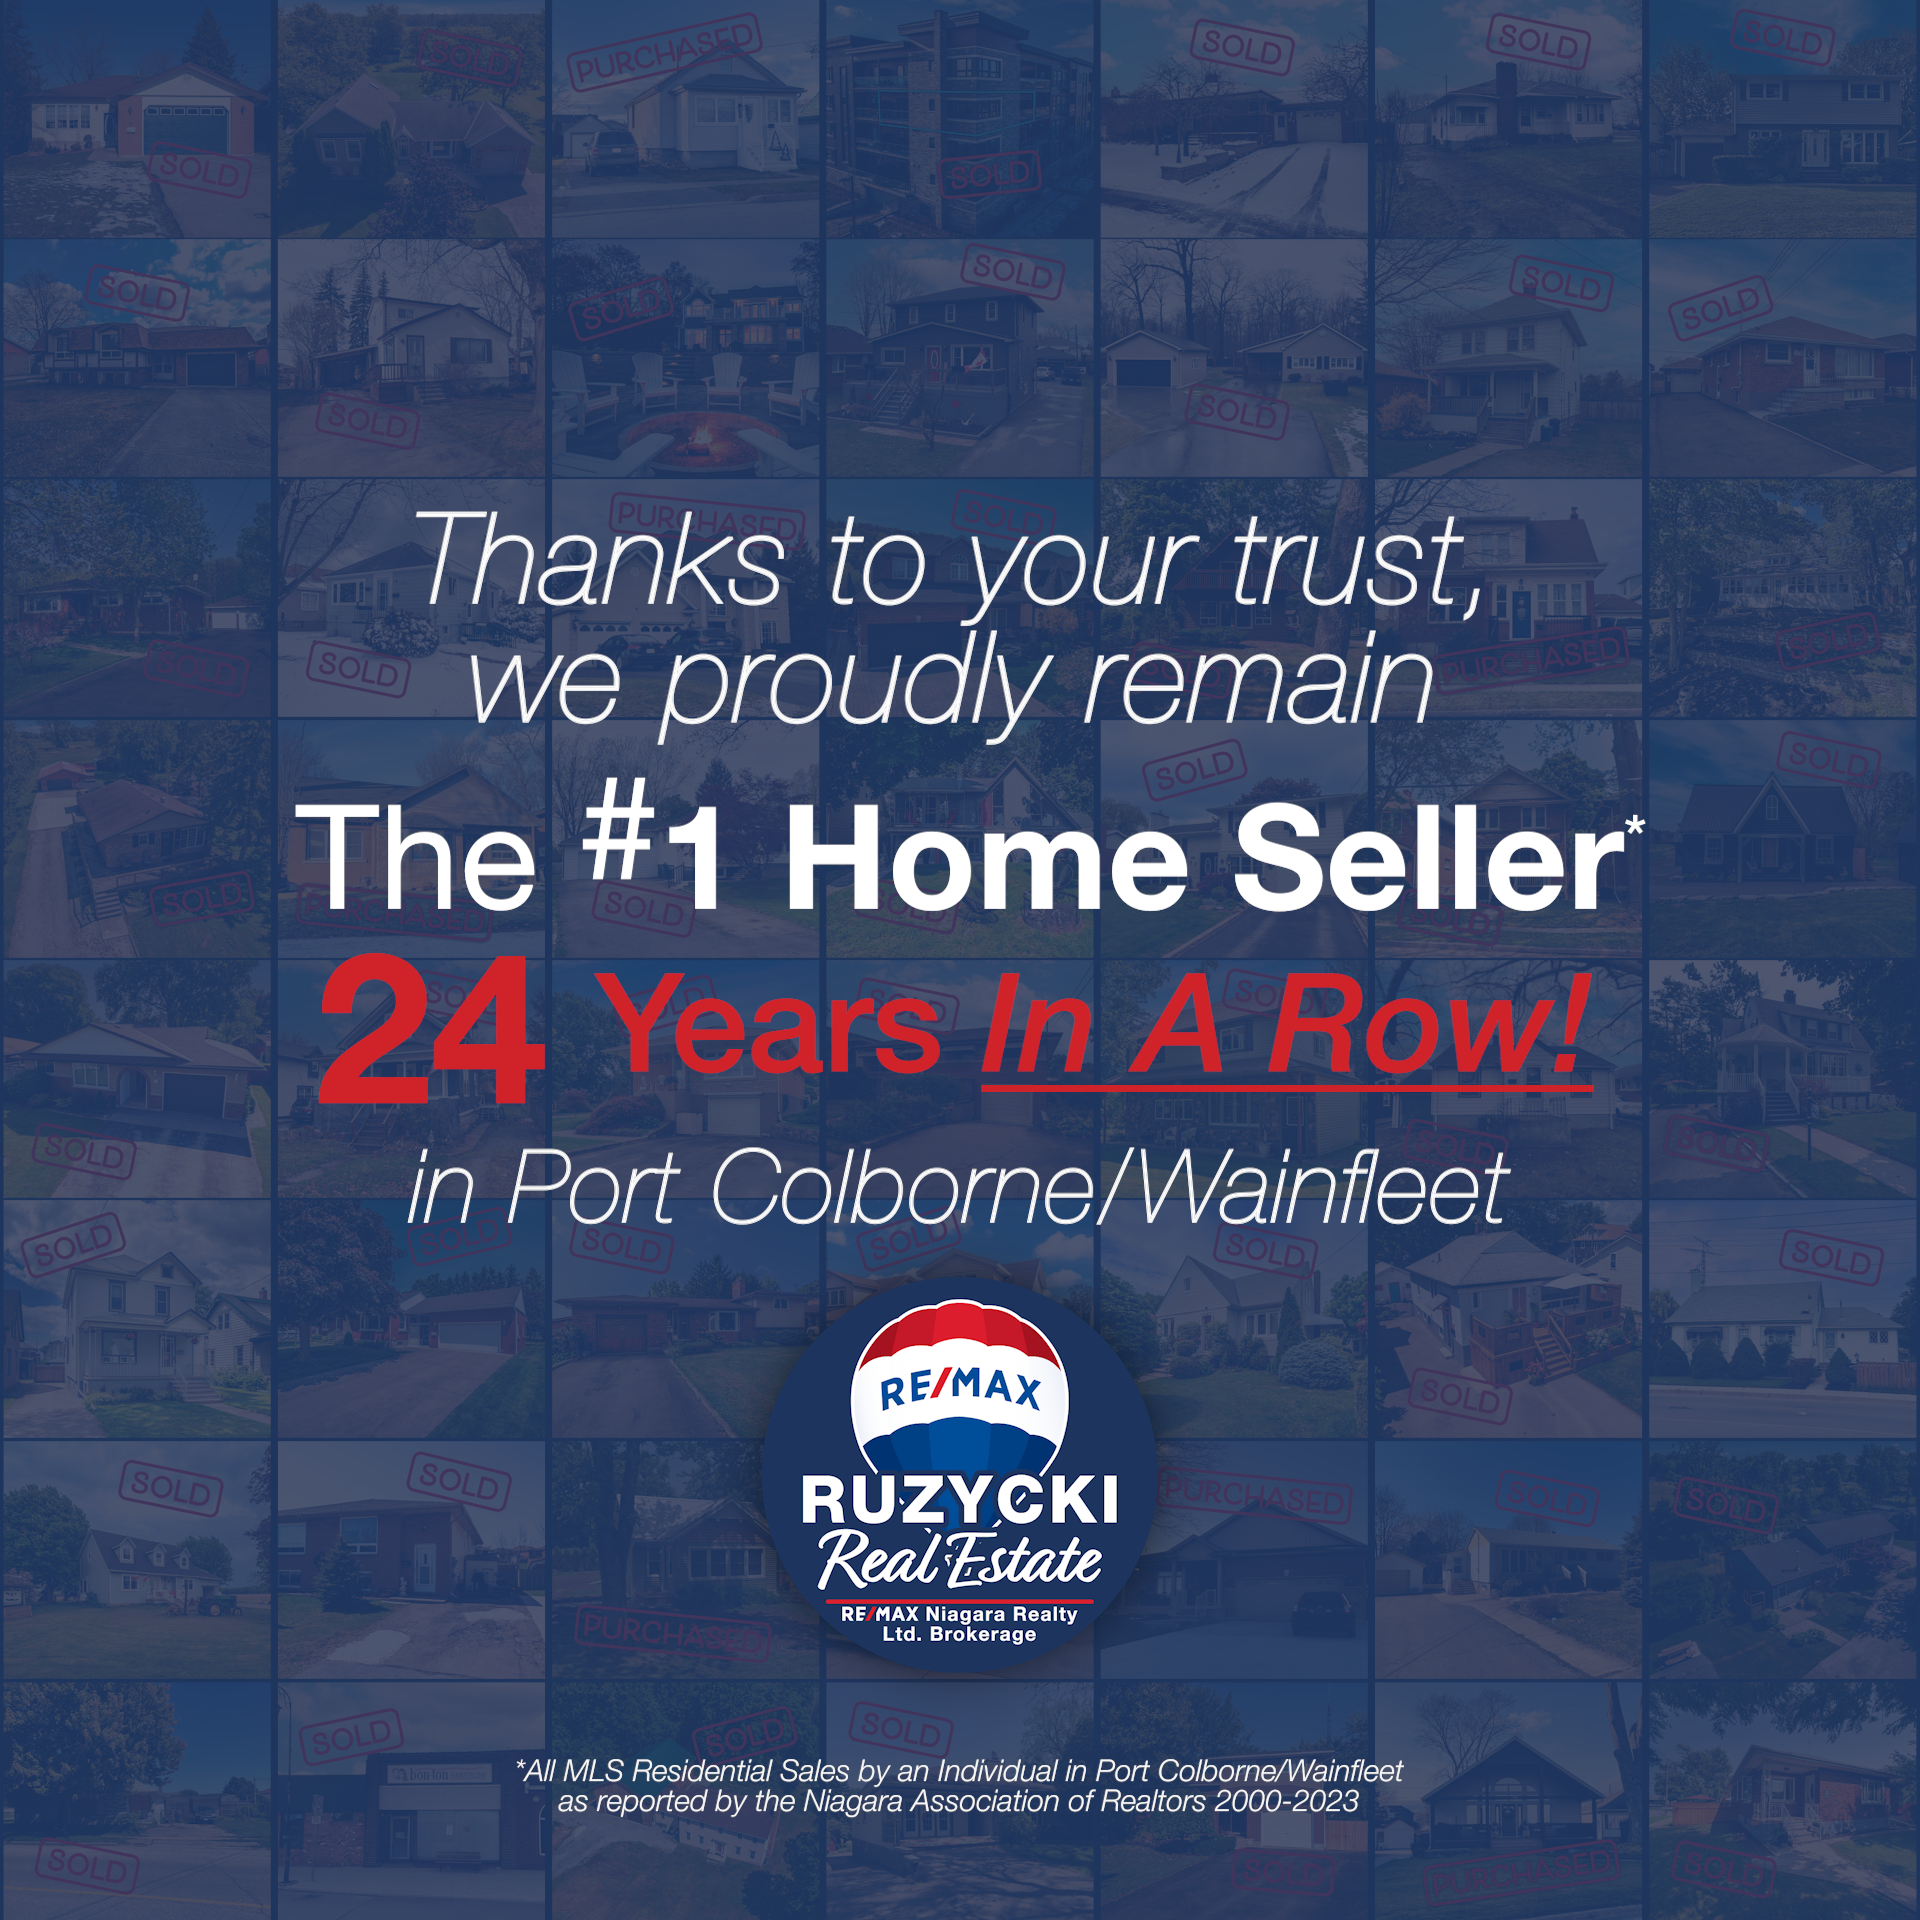 Frank Ruzycki is the #1 Home Seller in Port Colborne/Wainfleet for 24 Years In A Row